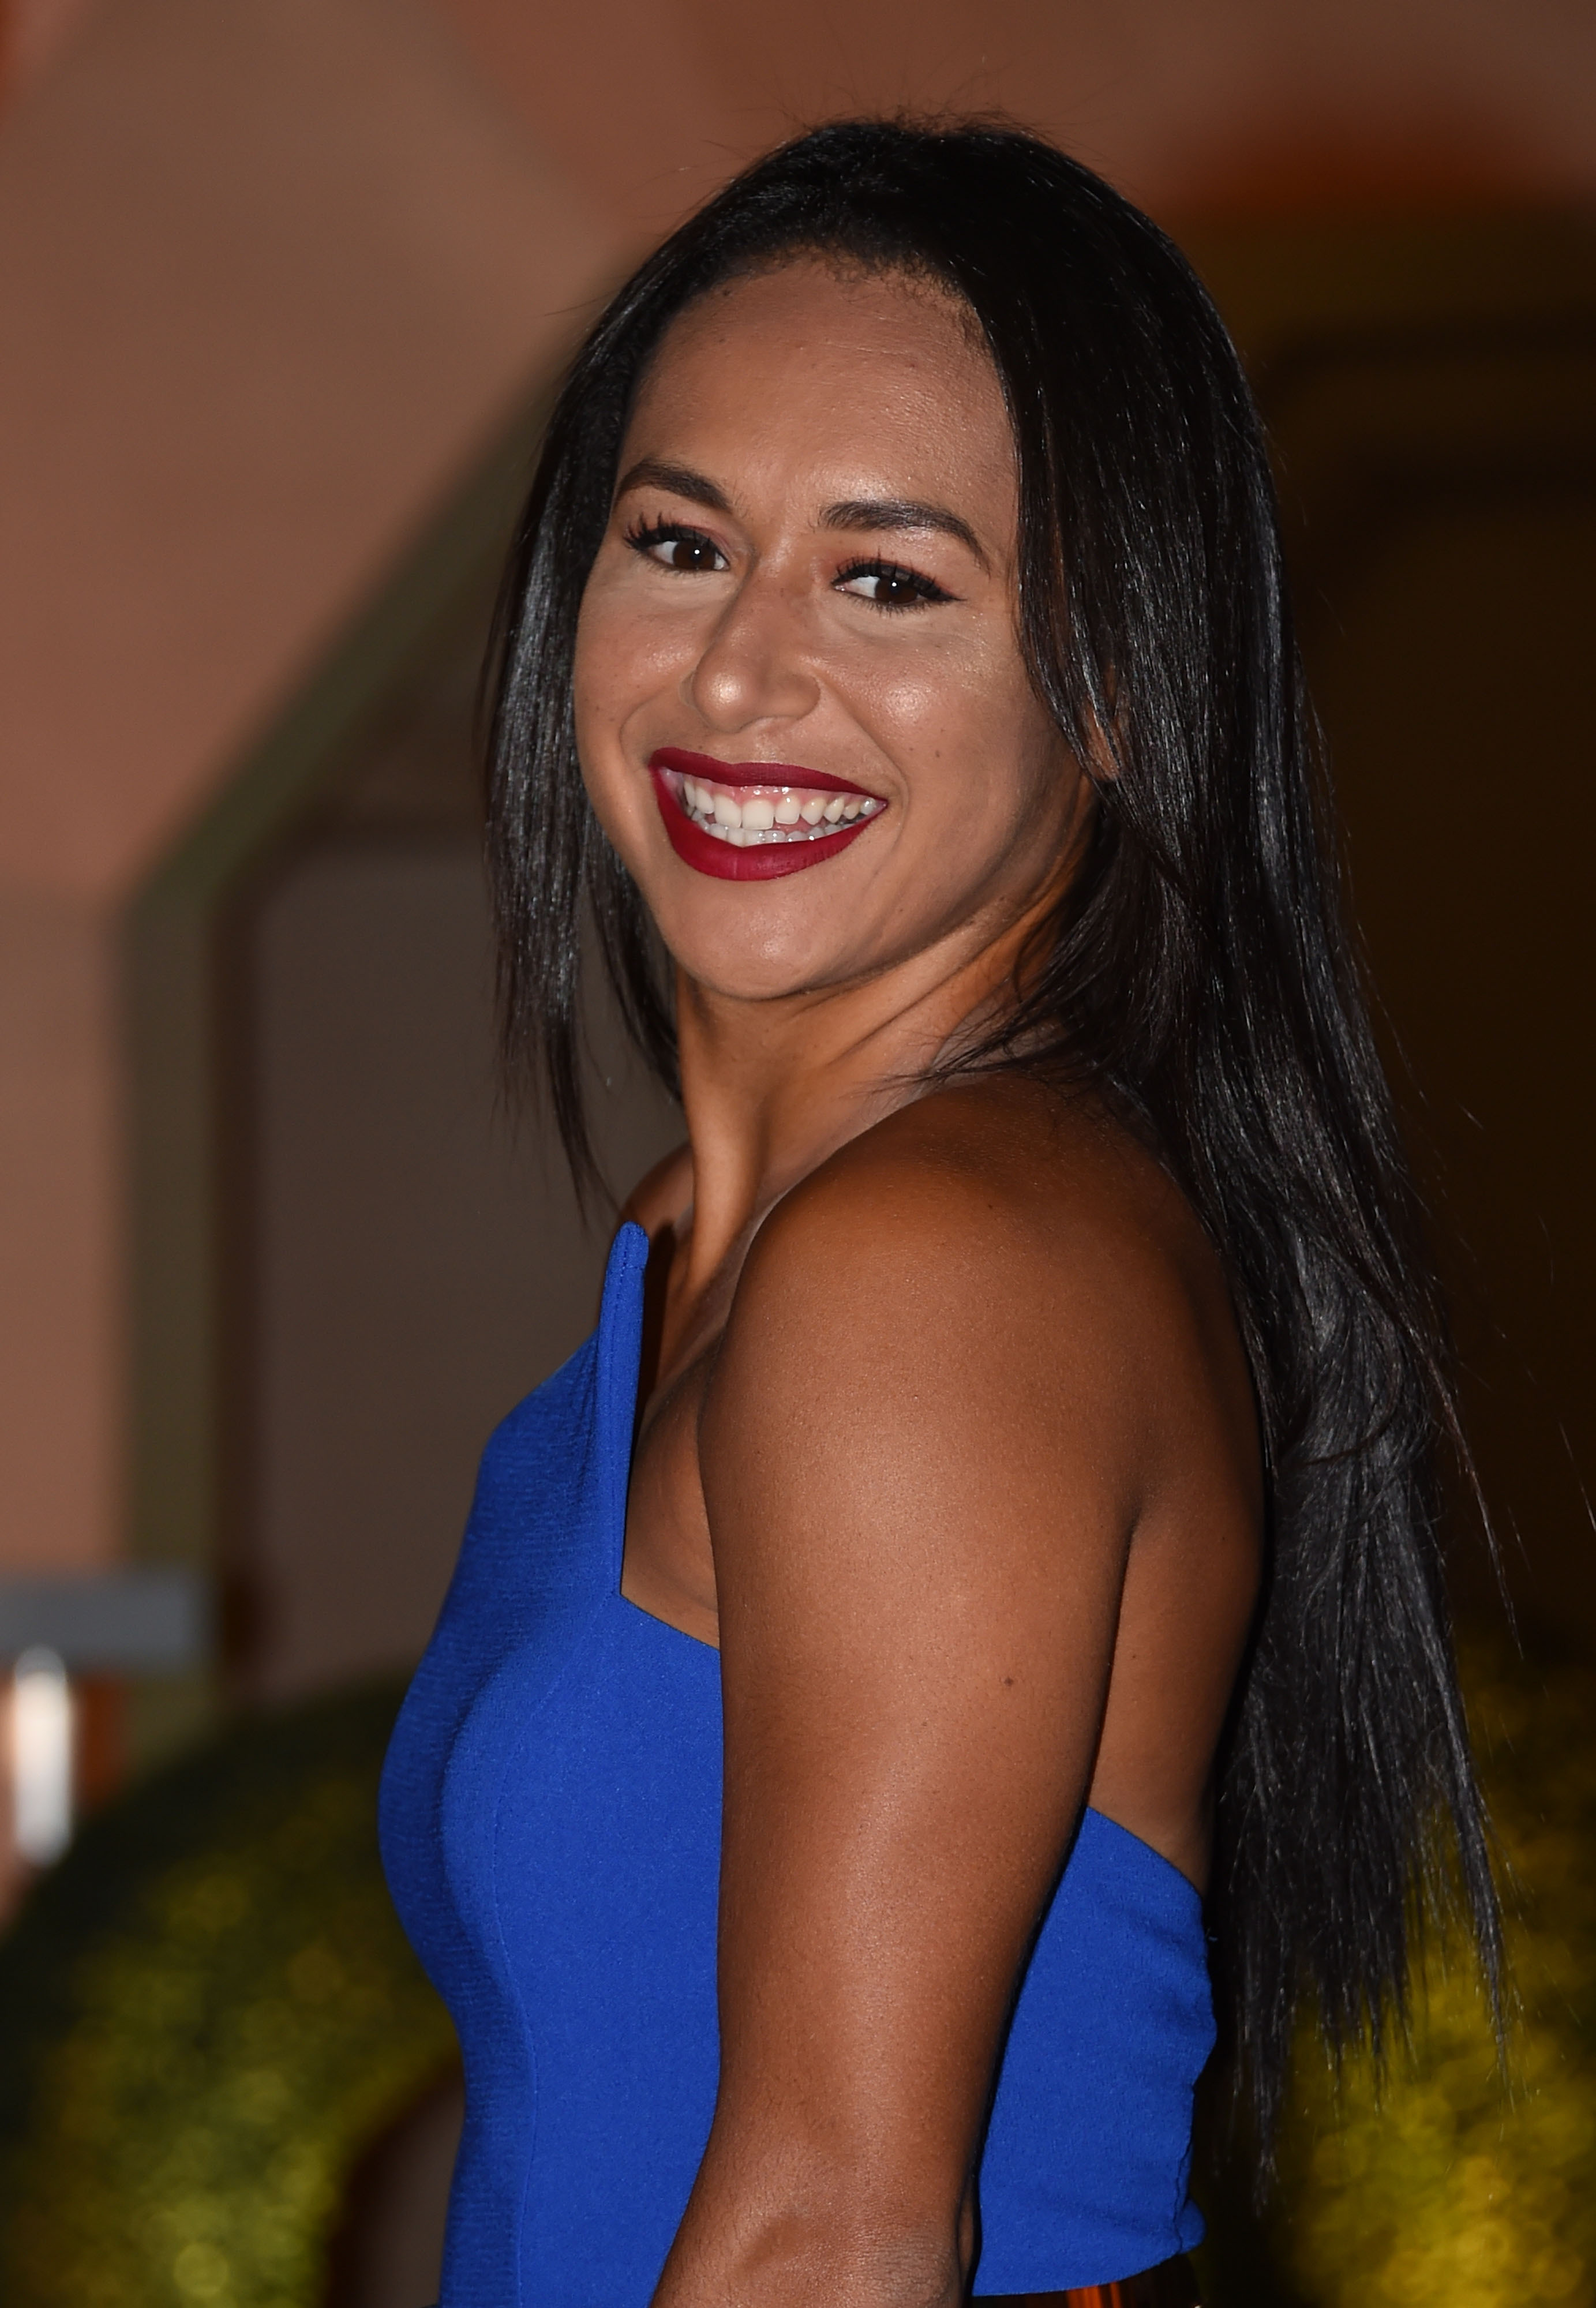 Heather Watson arriving at the Wimbledon Champions Dinner 2017, at the Guildhall, London.